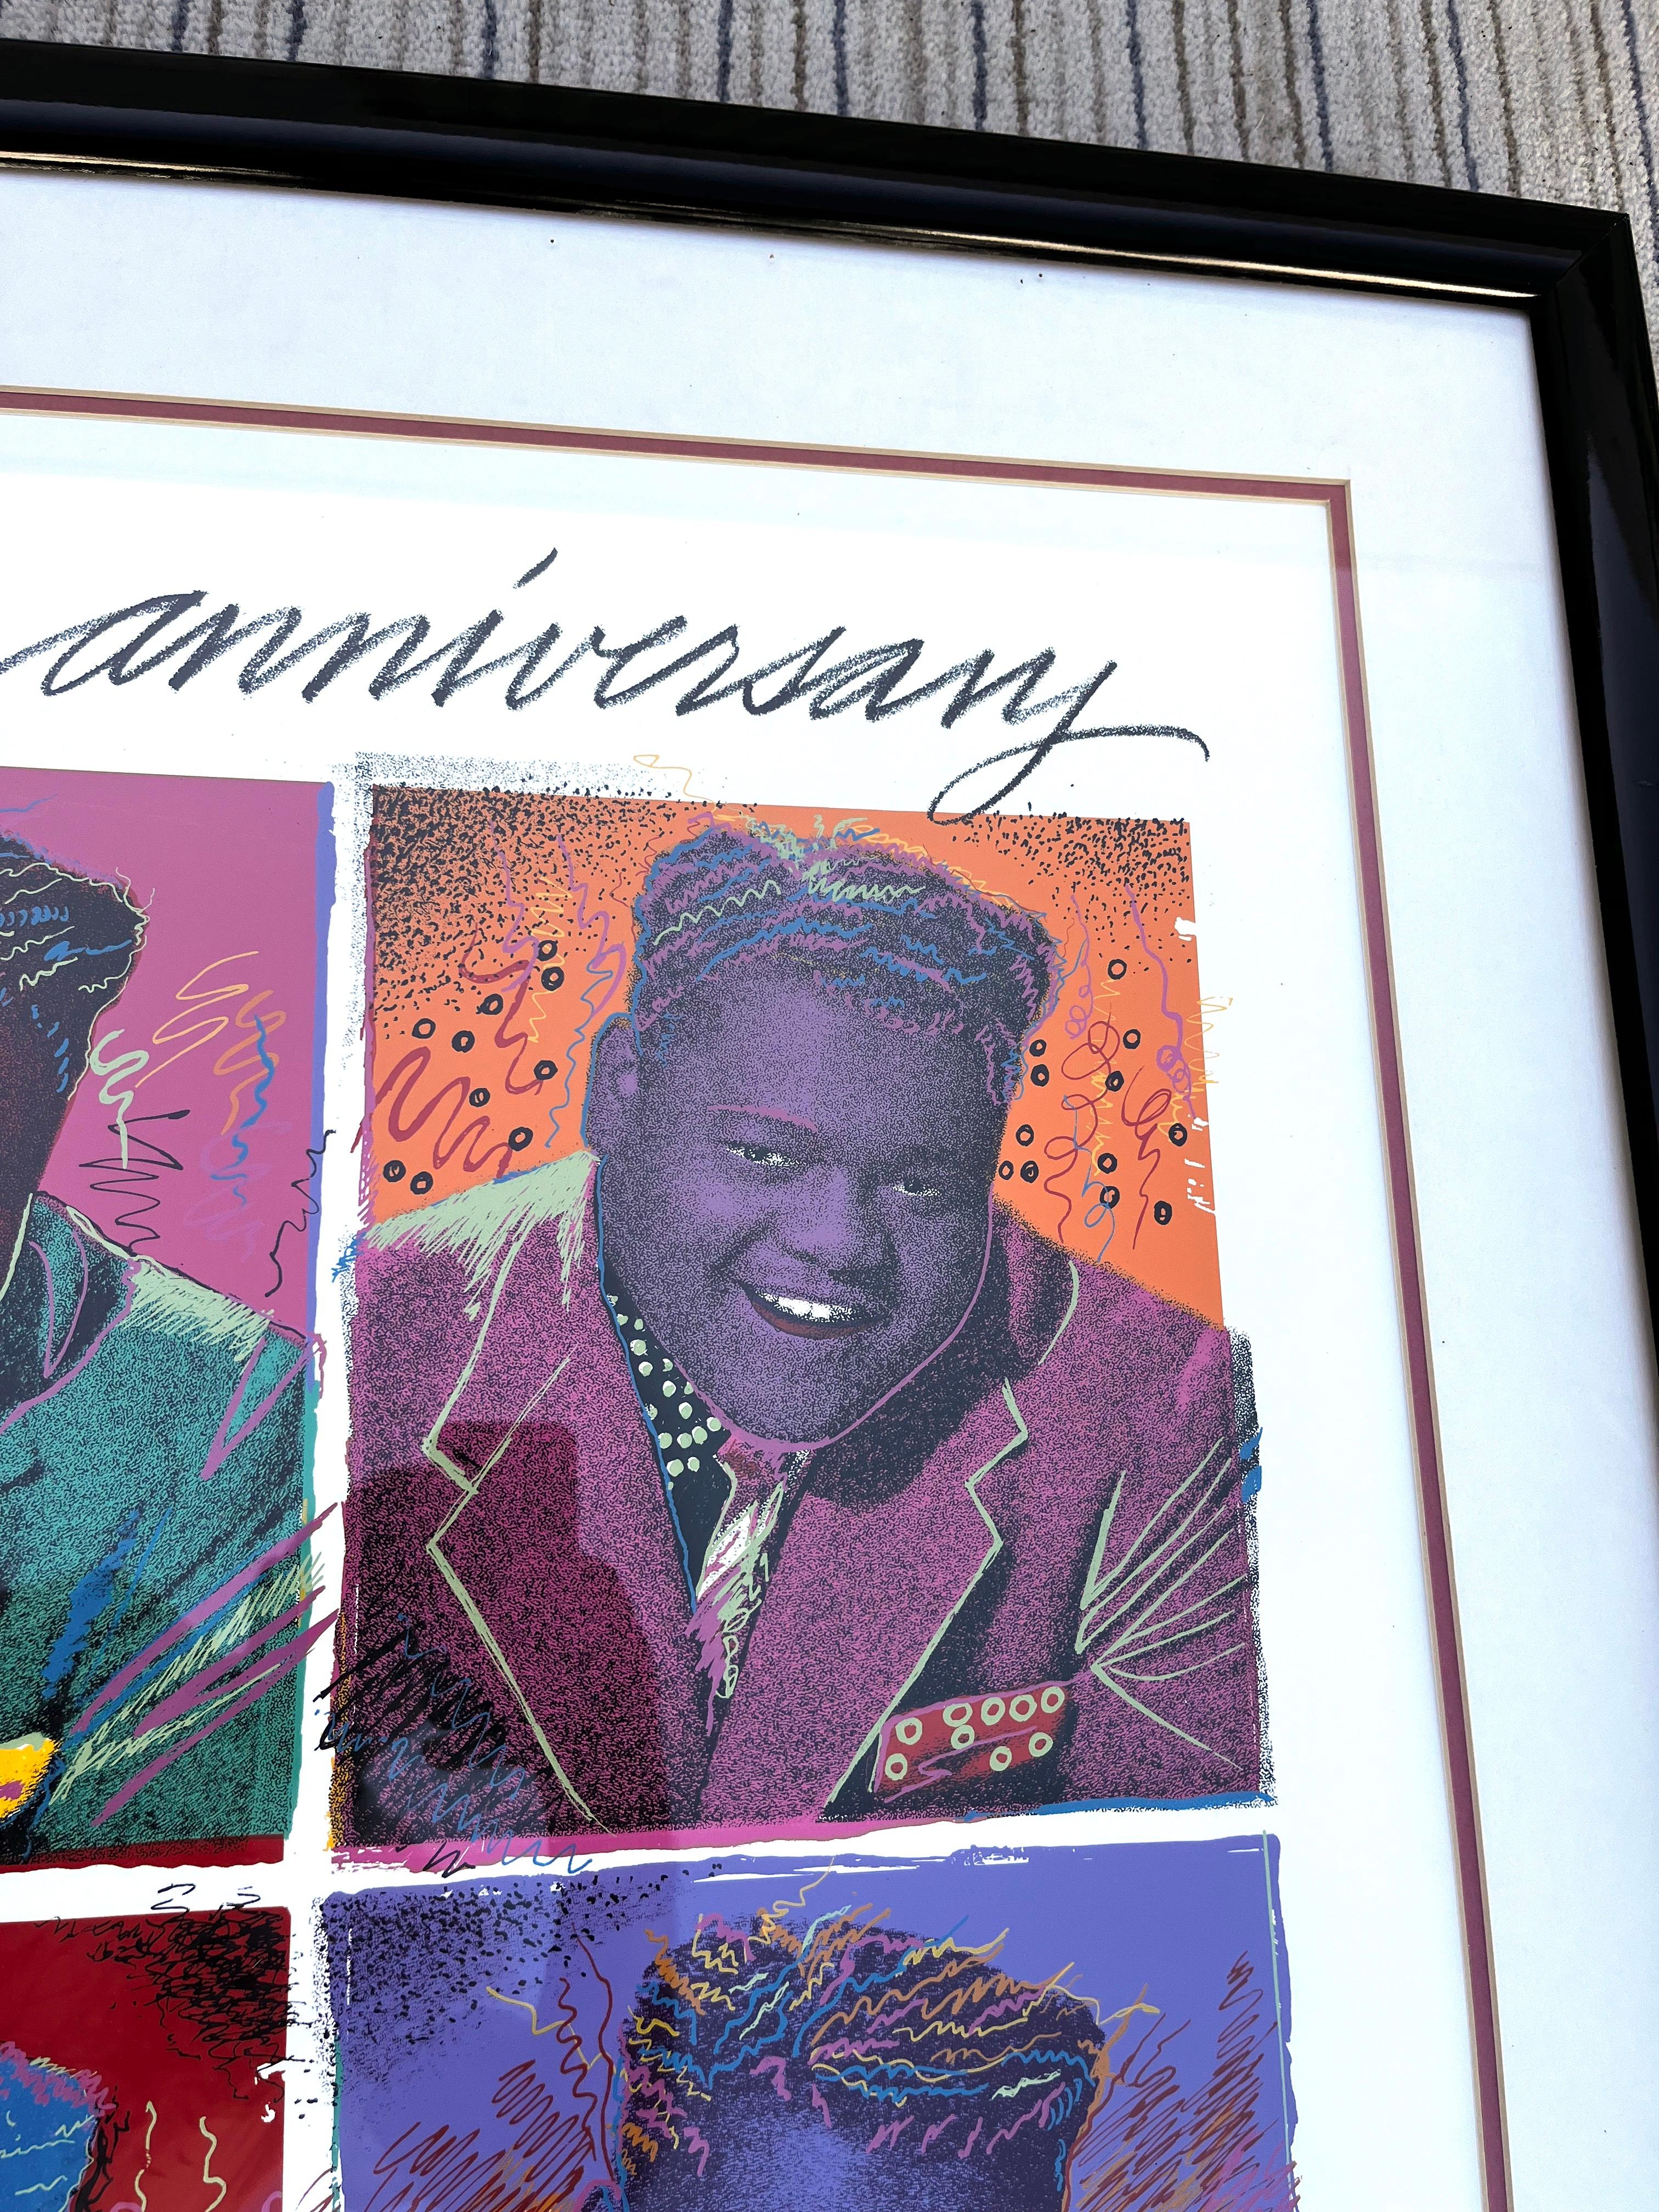 Post-Modern New Orleans 1989 Jazz Festival 20th Anniversary Fats Domino Original Poster For Sale